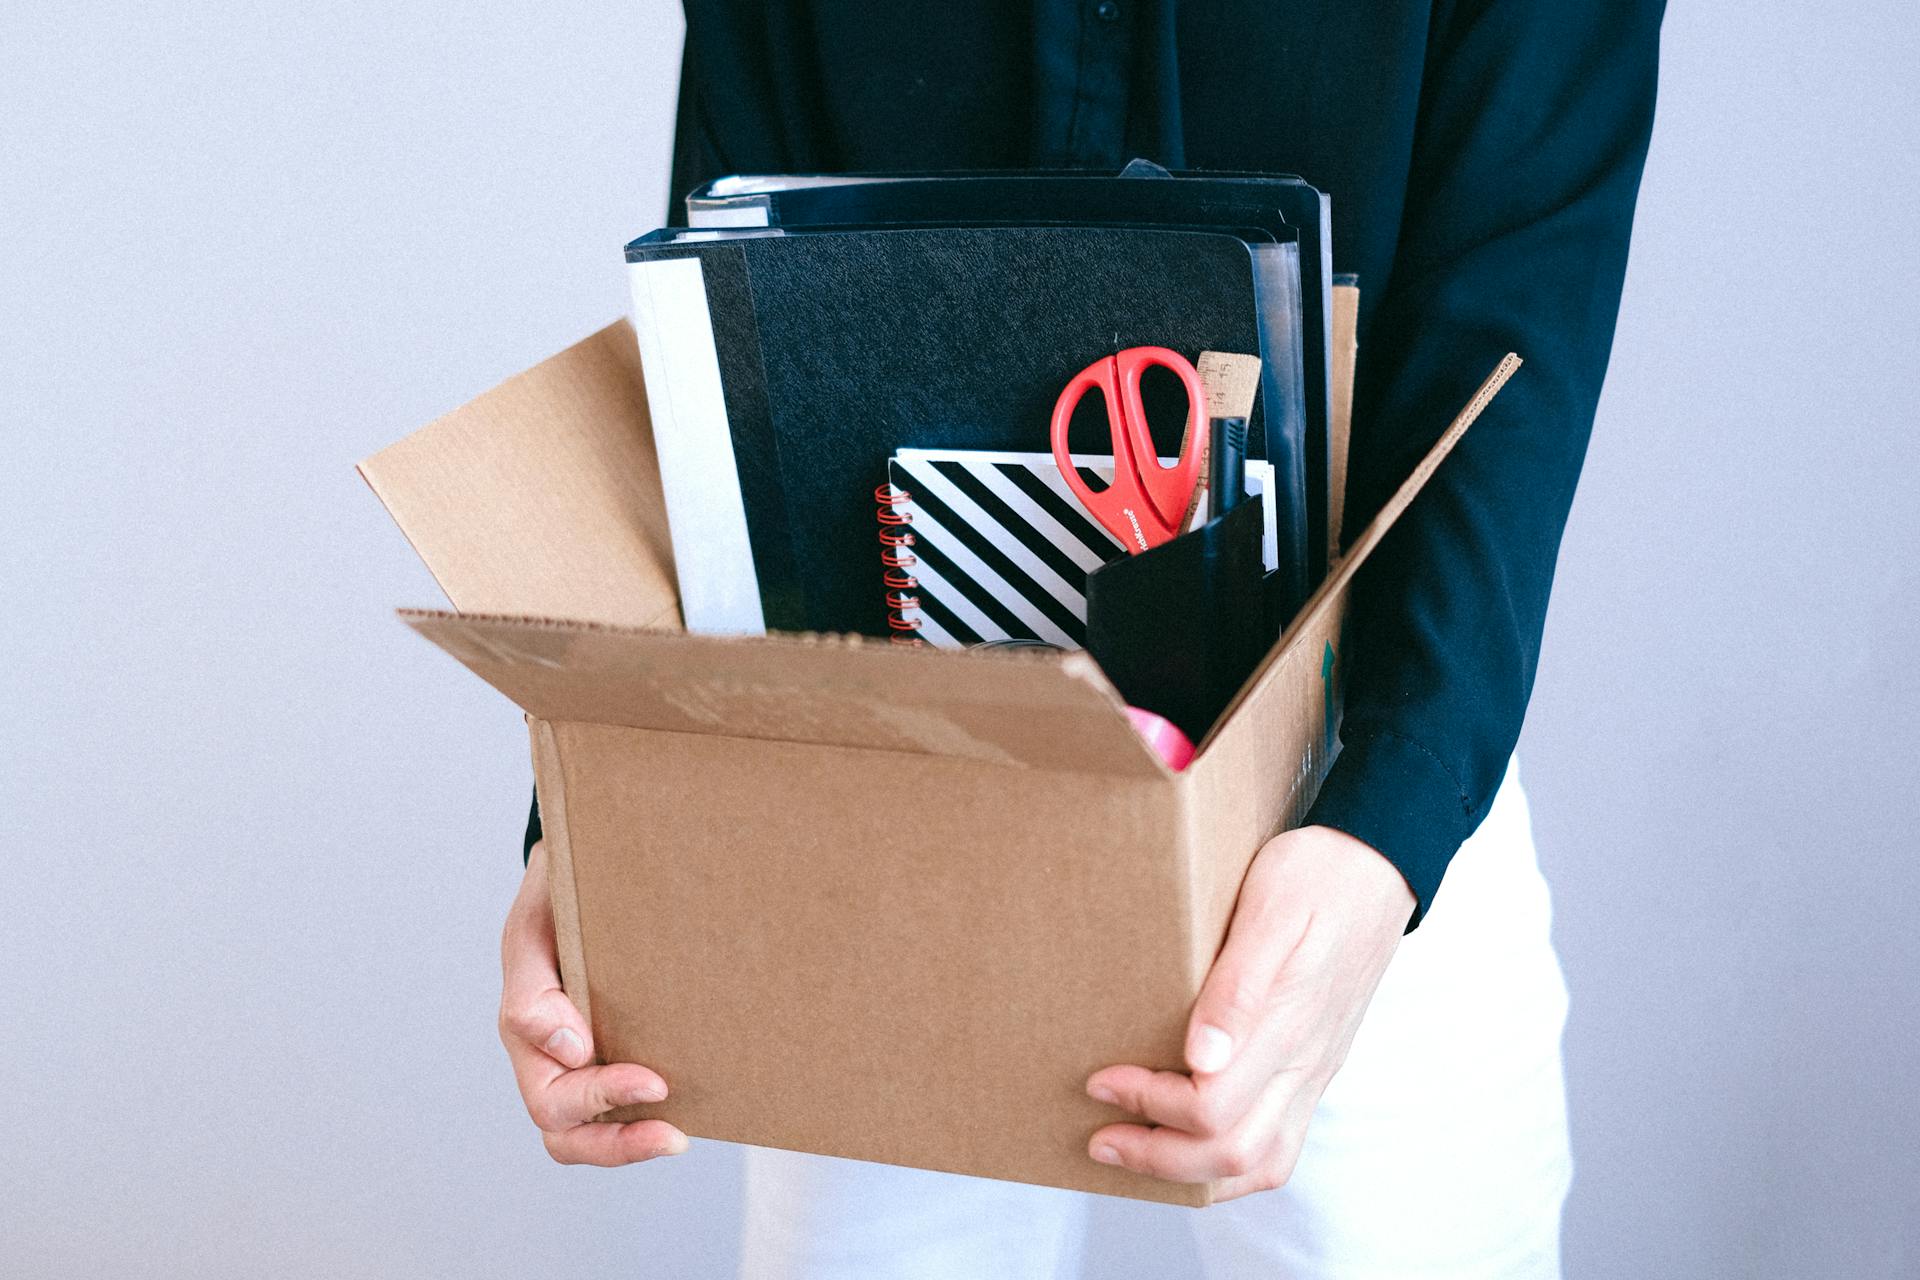 A woman holding a carton with her office items inside | Source: Pexels